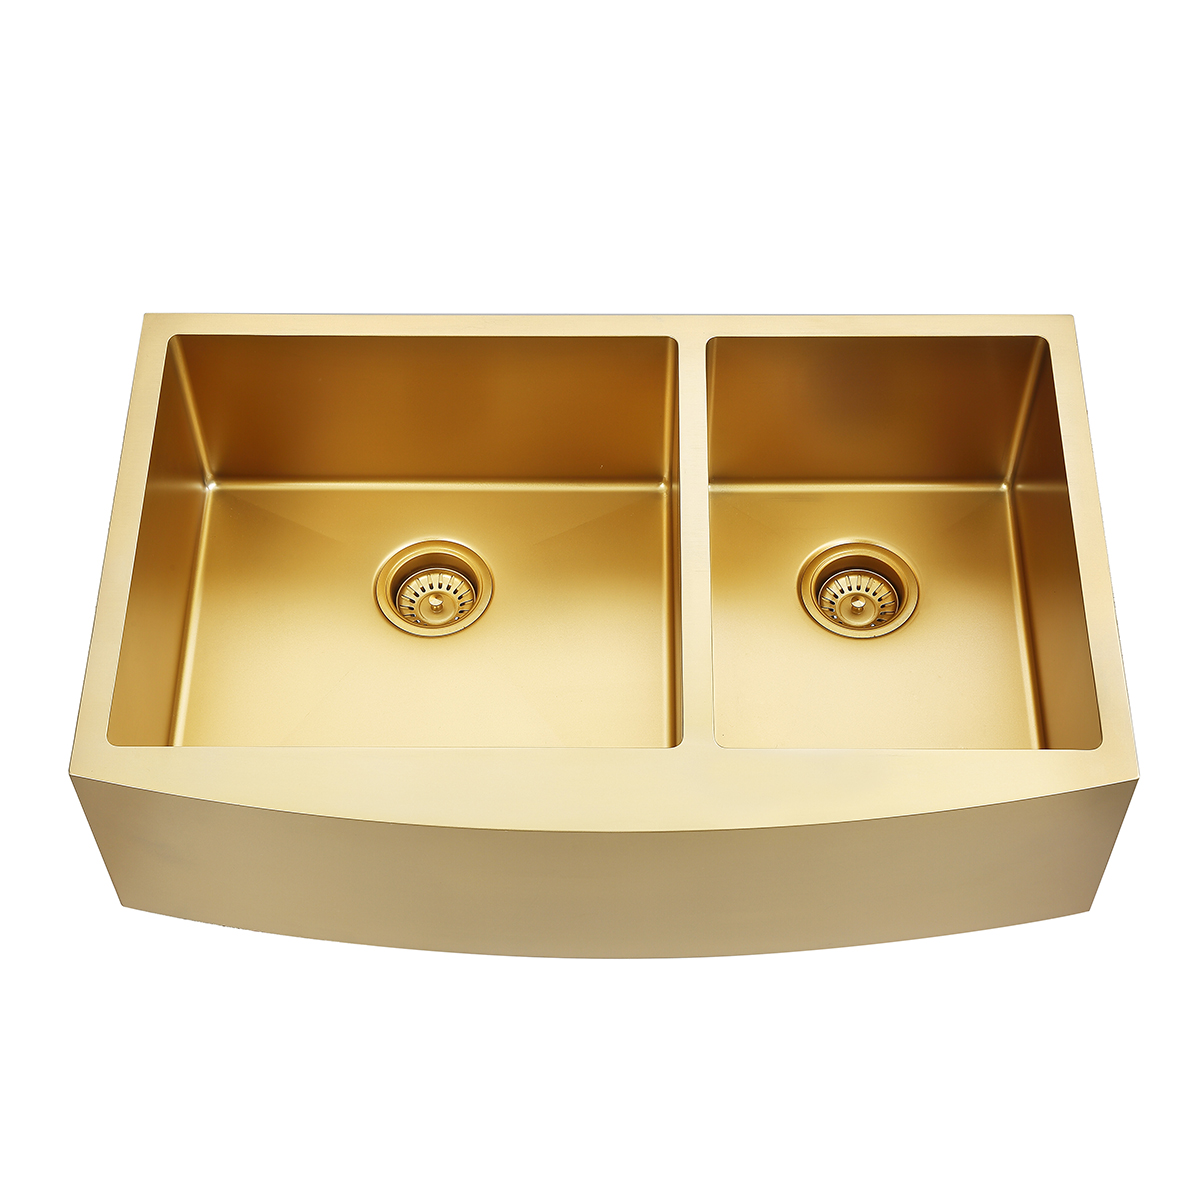 Champagne Gold Stainless Steel Handmade Farmhouse Kitchen Sink with Apron Front